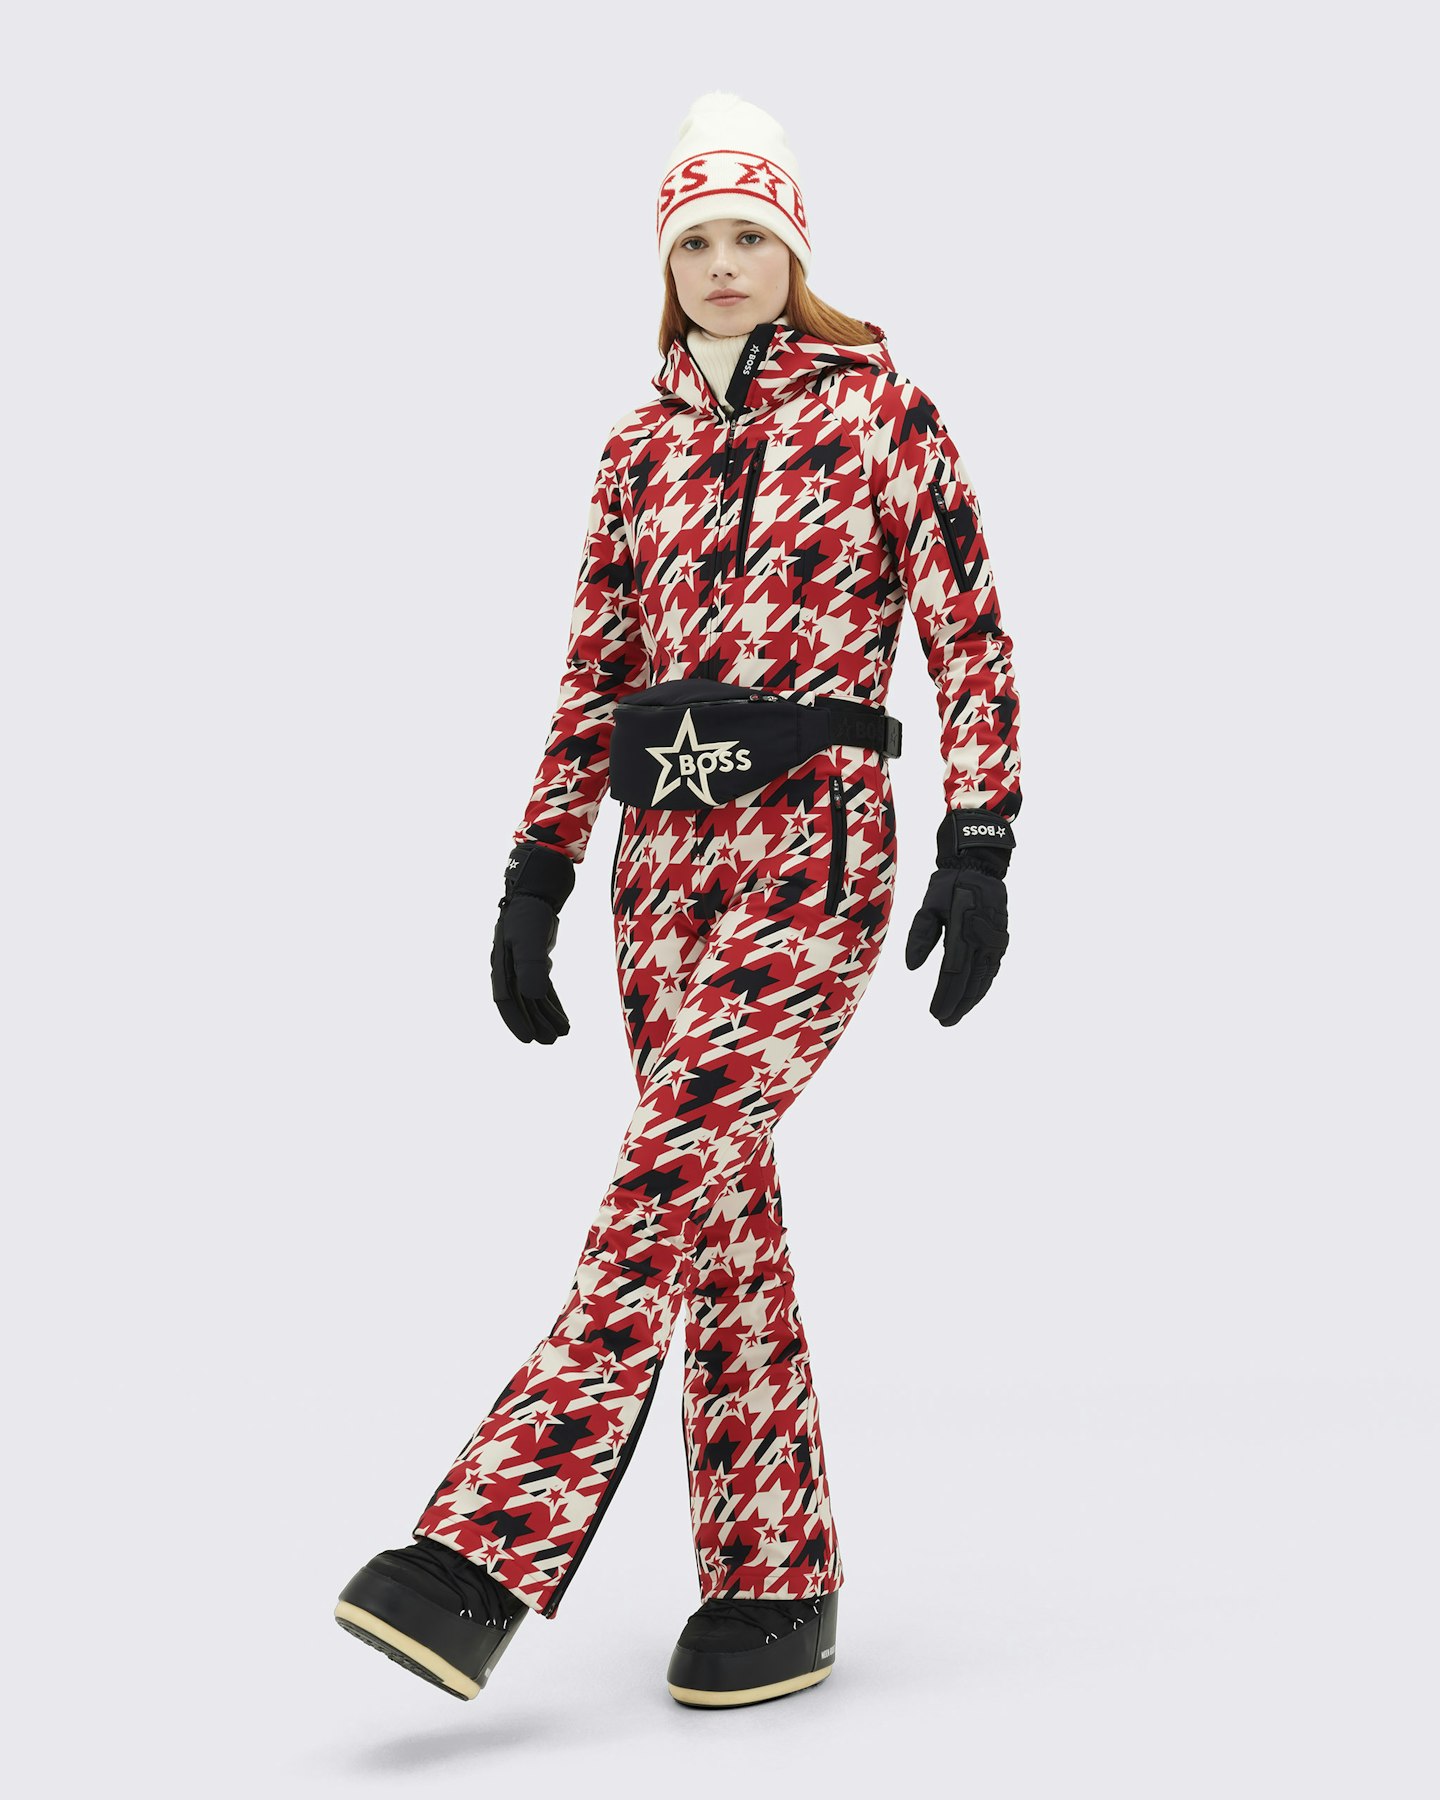 PM x BOSS Houndstooth Ski Suit 1